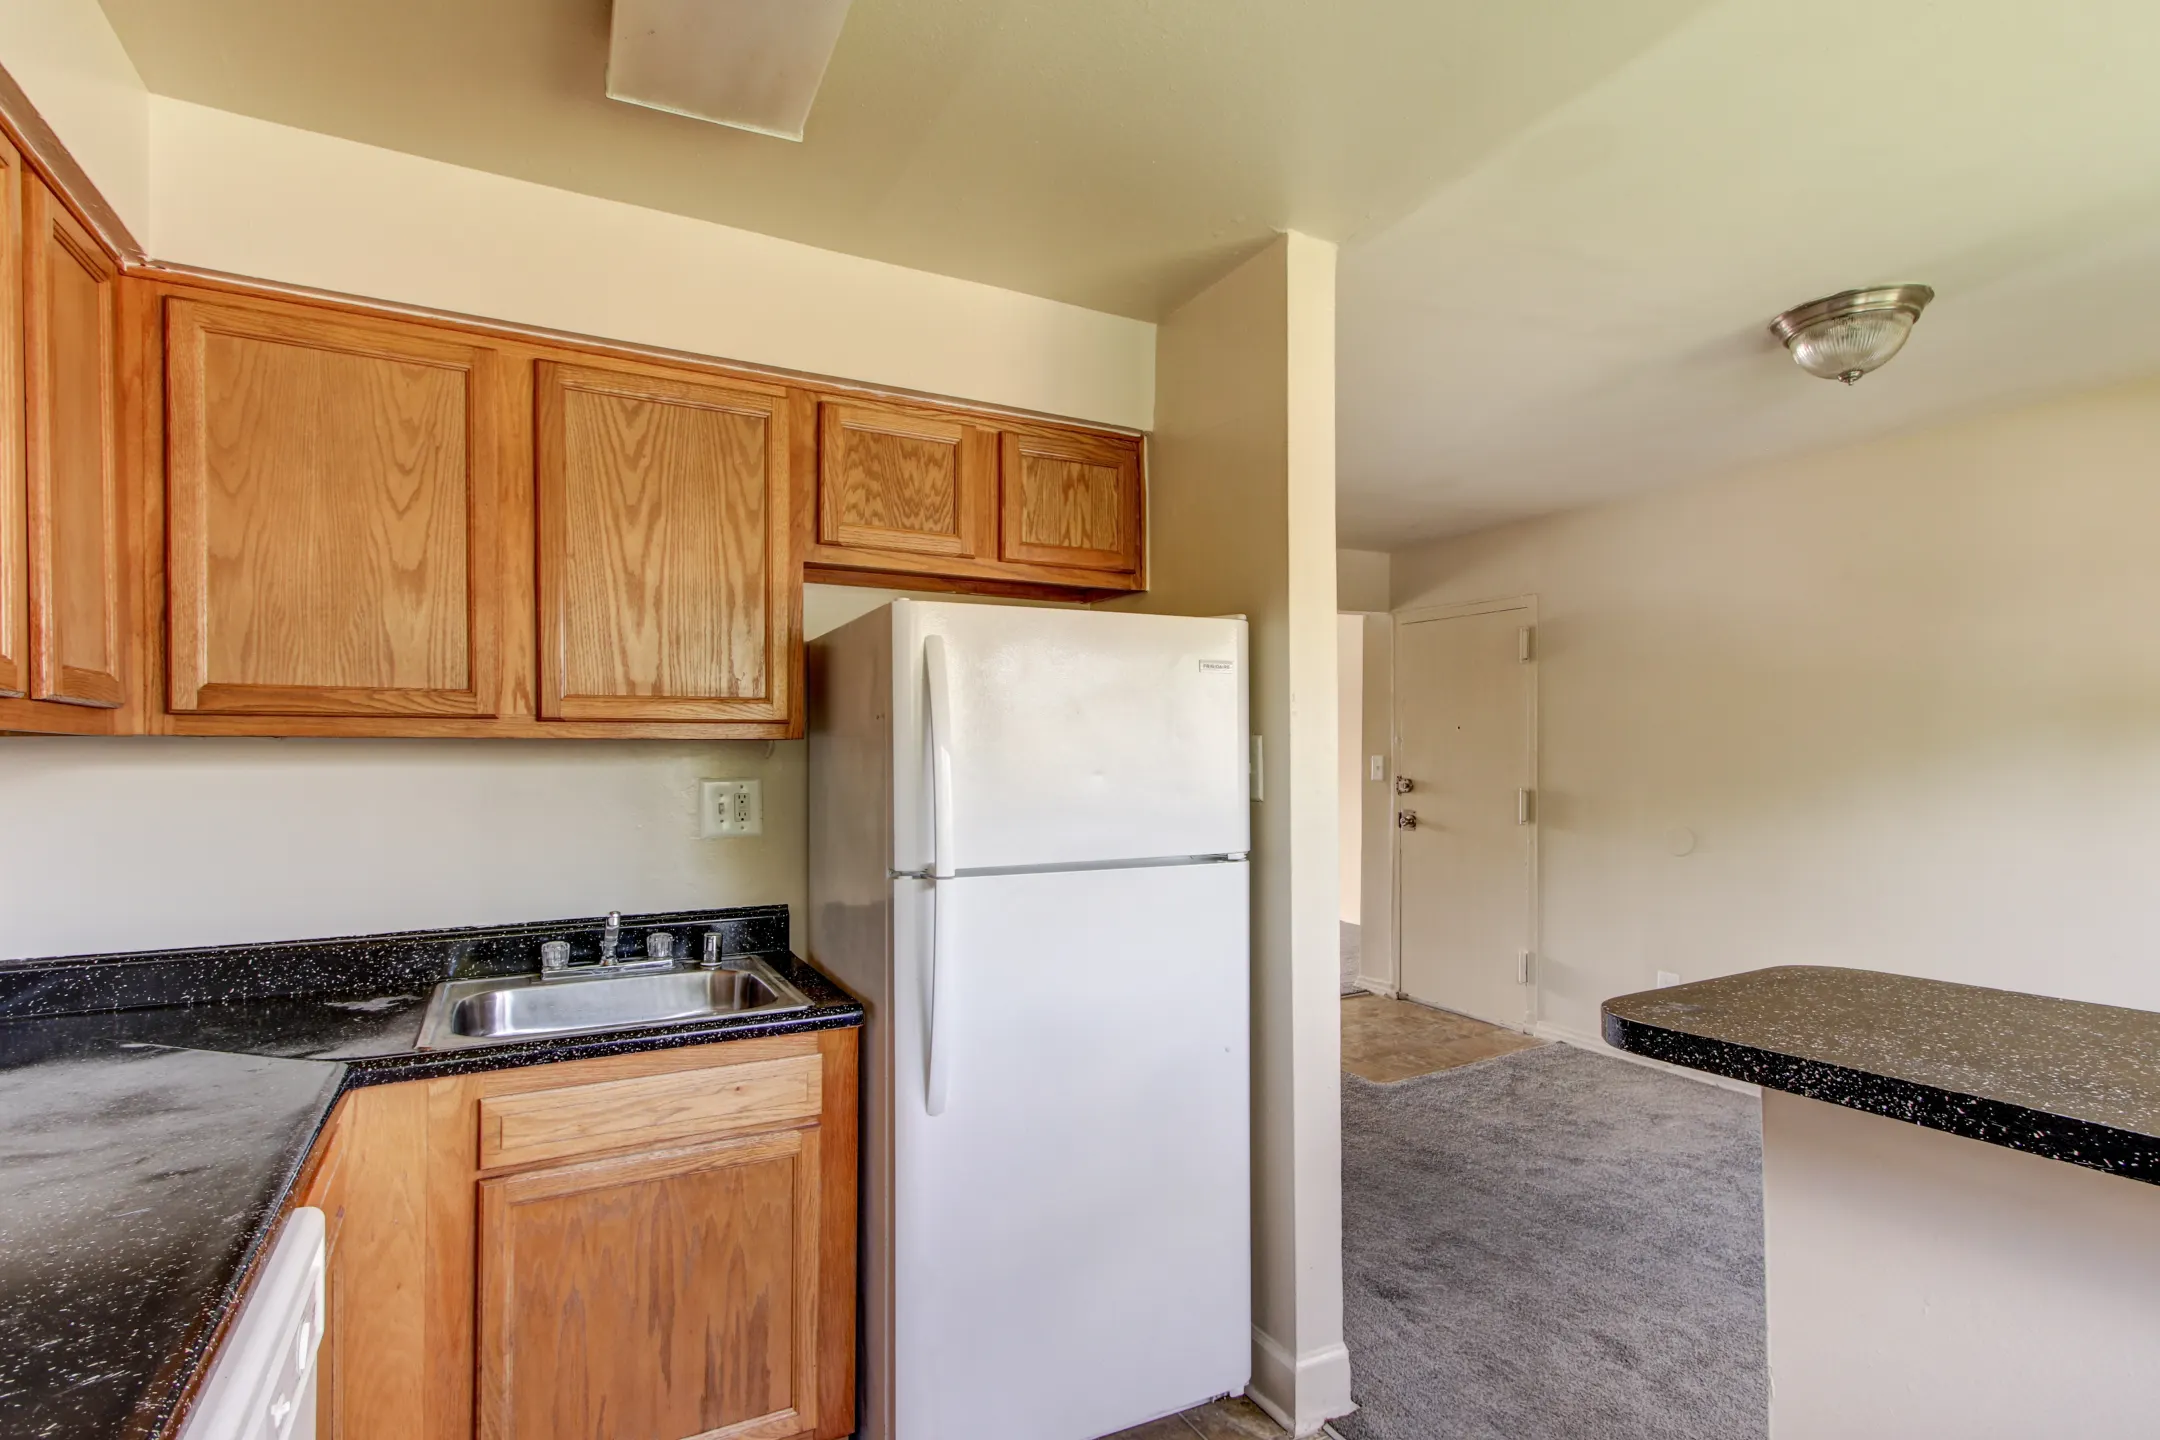 Kitchen - Avenue Apartments - District Heights, MD